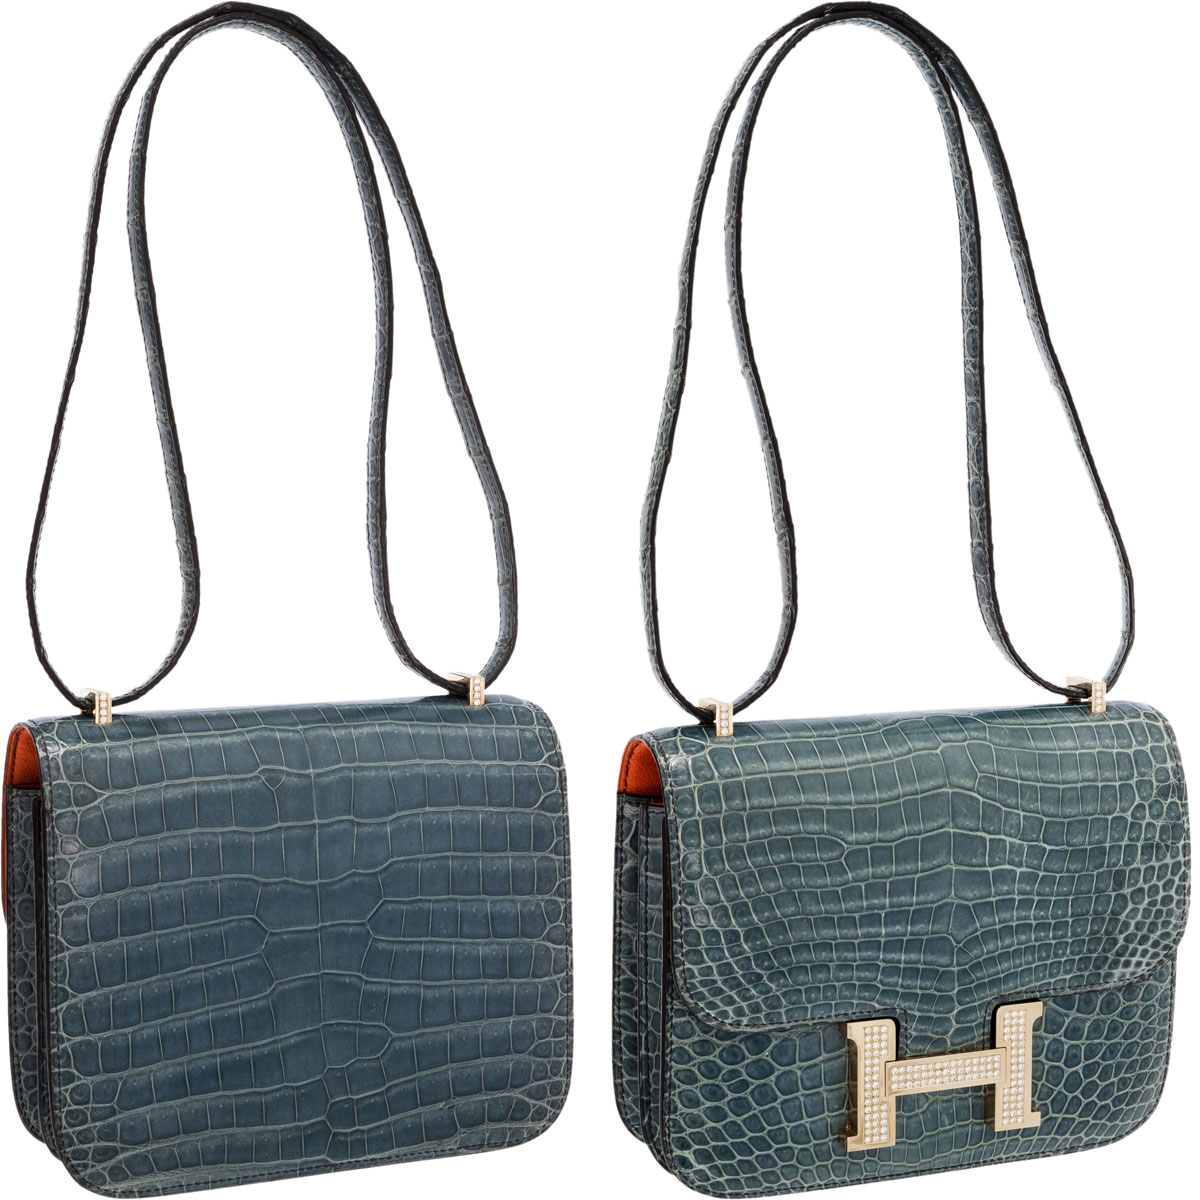 Authentic Hermes, Chanel, & Louis Vuitton Pieces for Grab at Heritage Auctions - eXtravaganzi